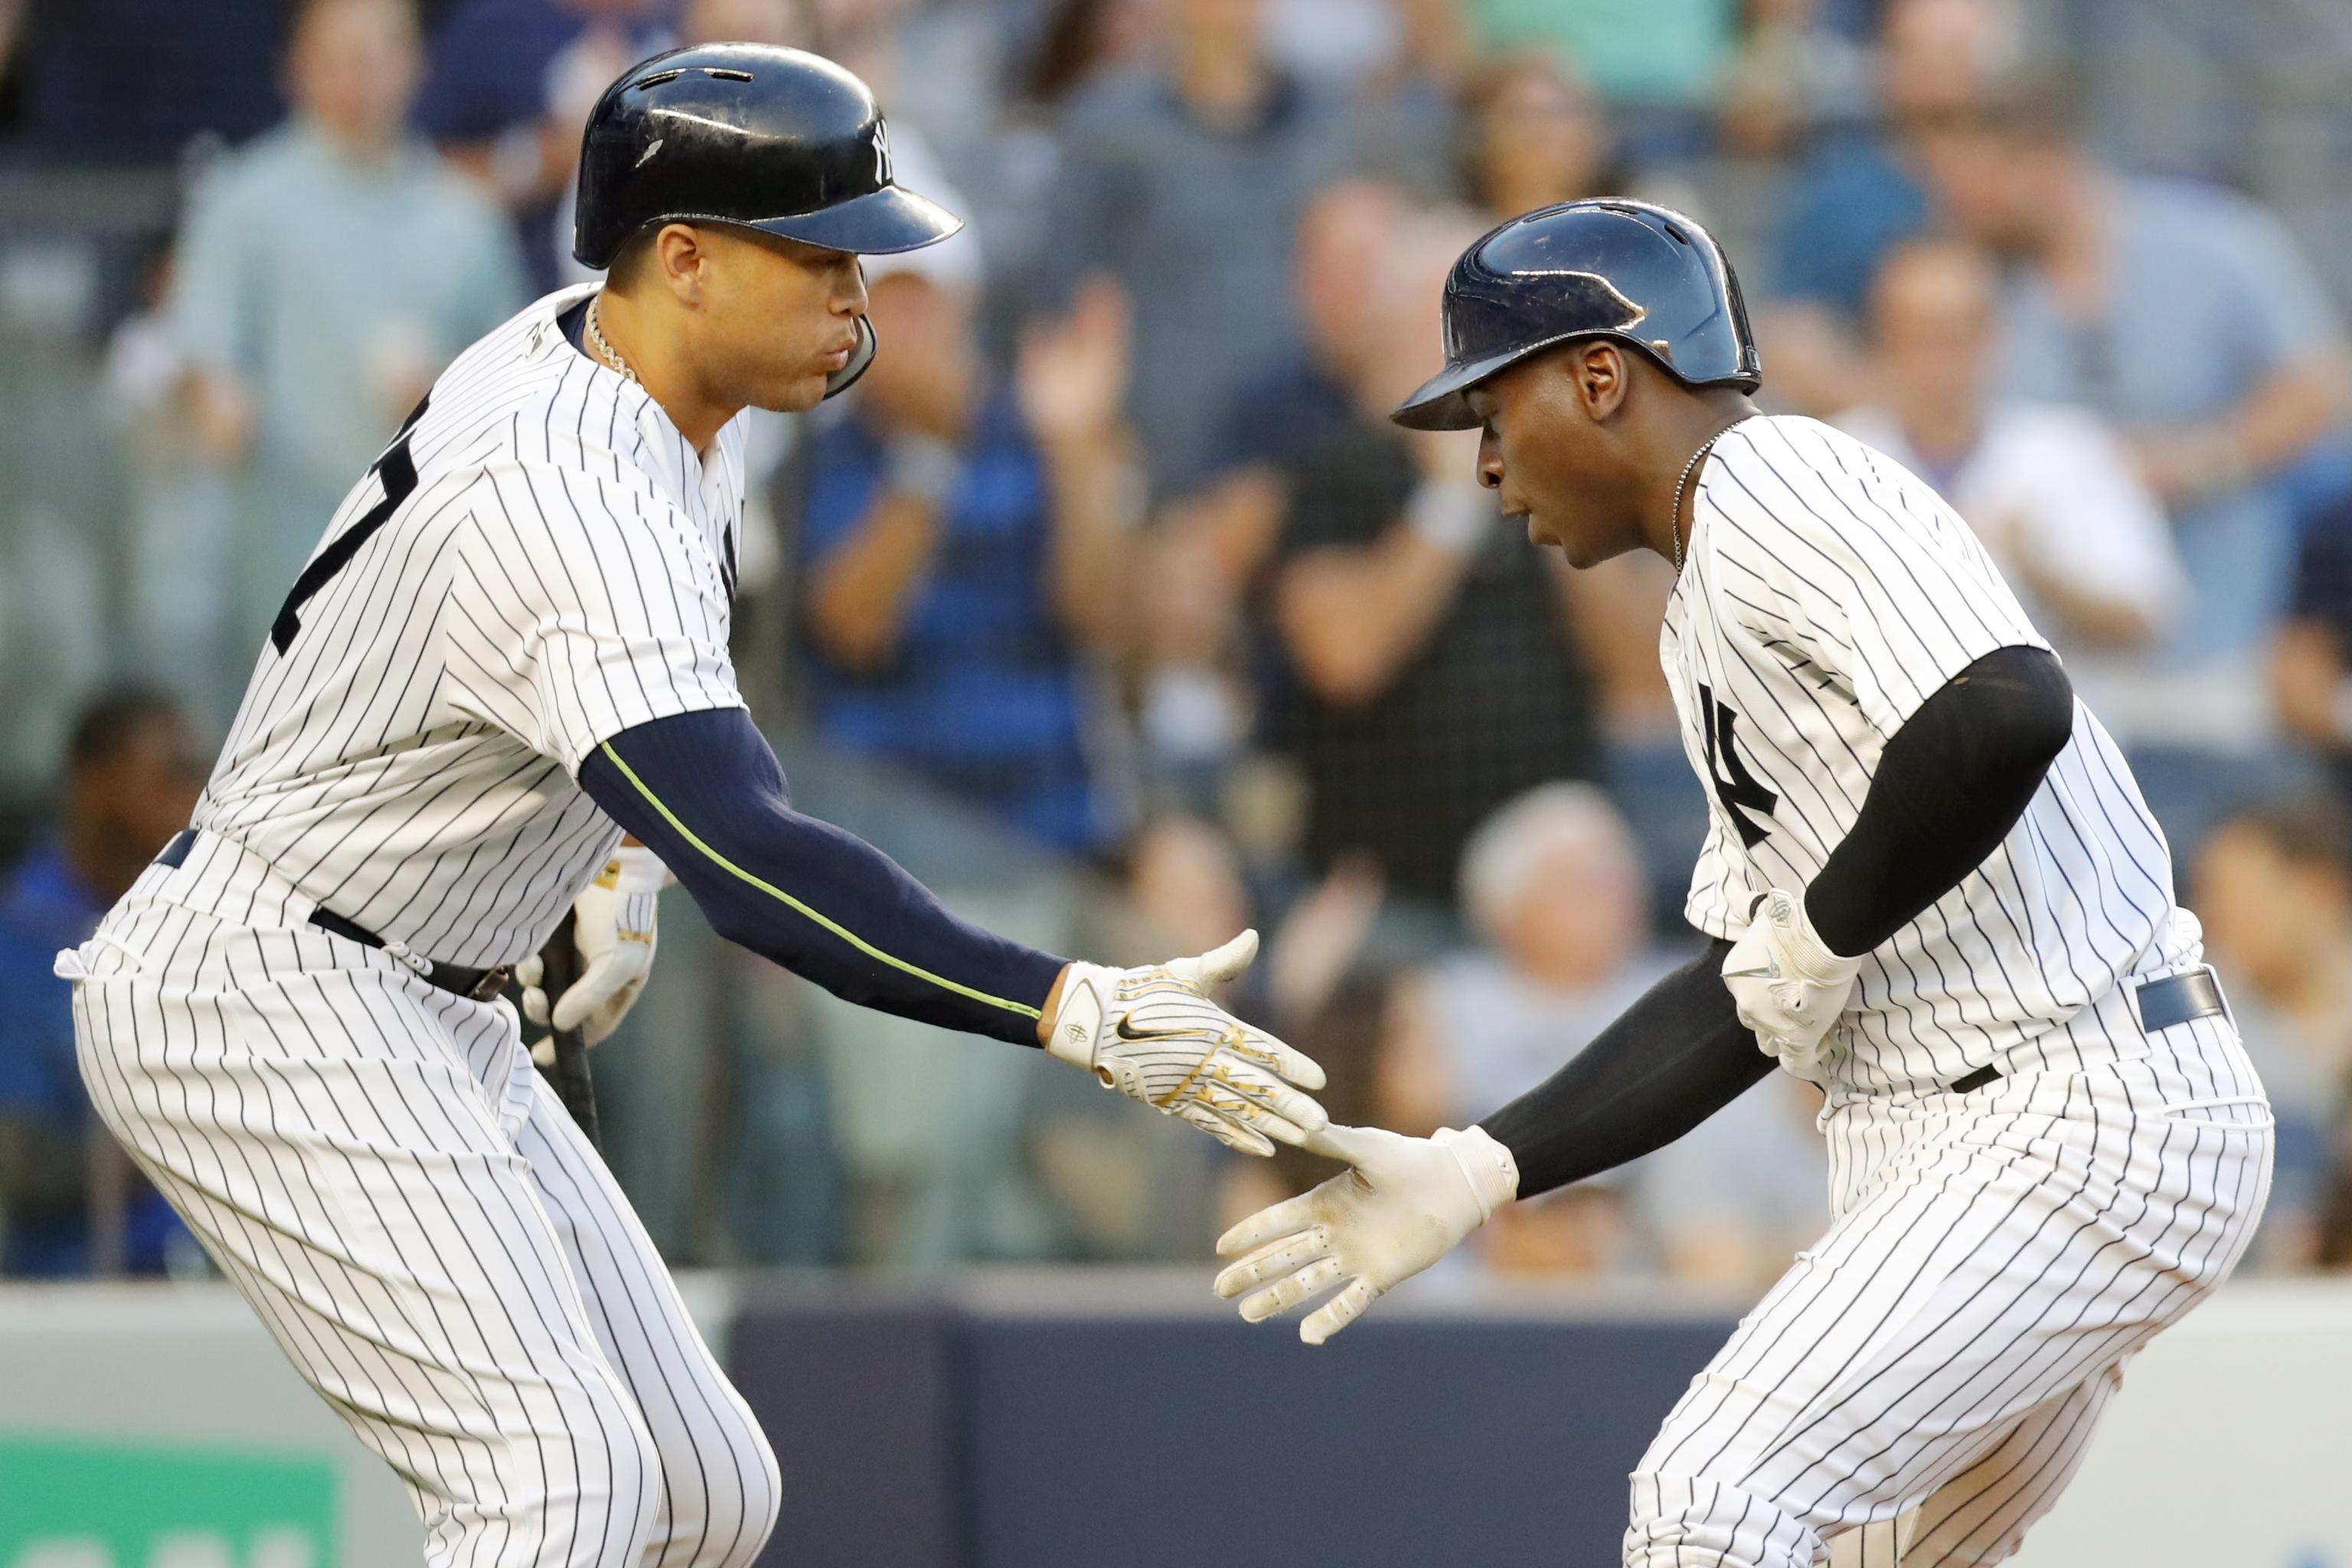 Yankees beat Orioles in extra innings, widen lead for playoff spot